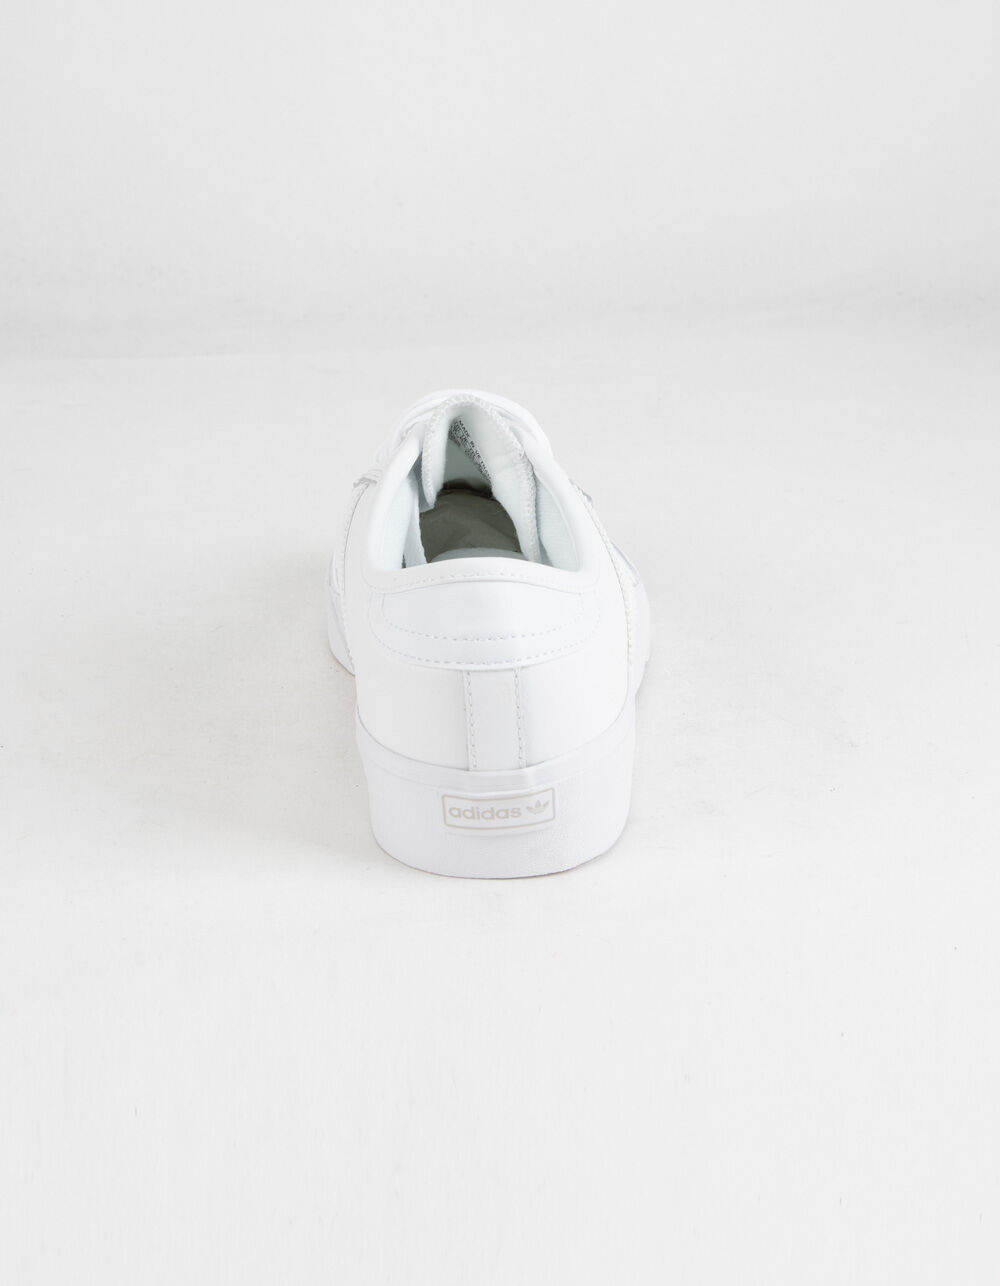 ADIDAS Superstar Womens Shoes - WHITE, Tillys